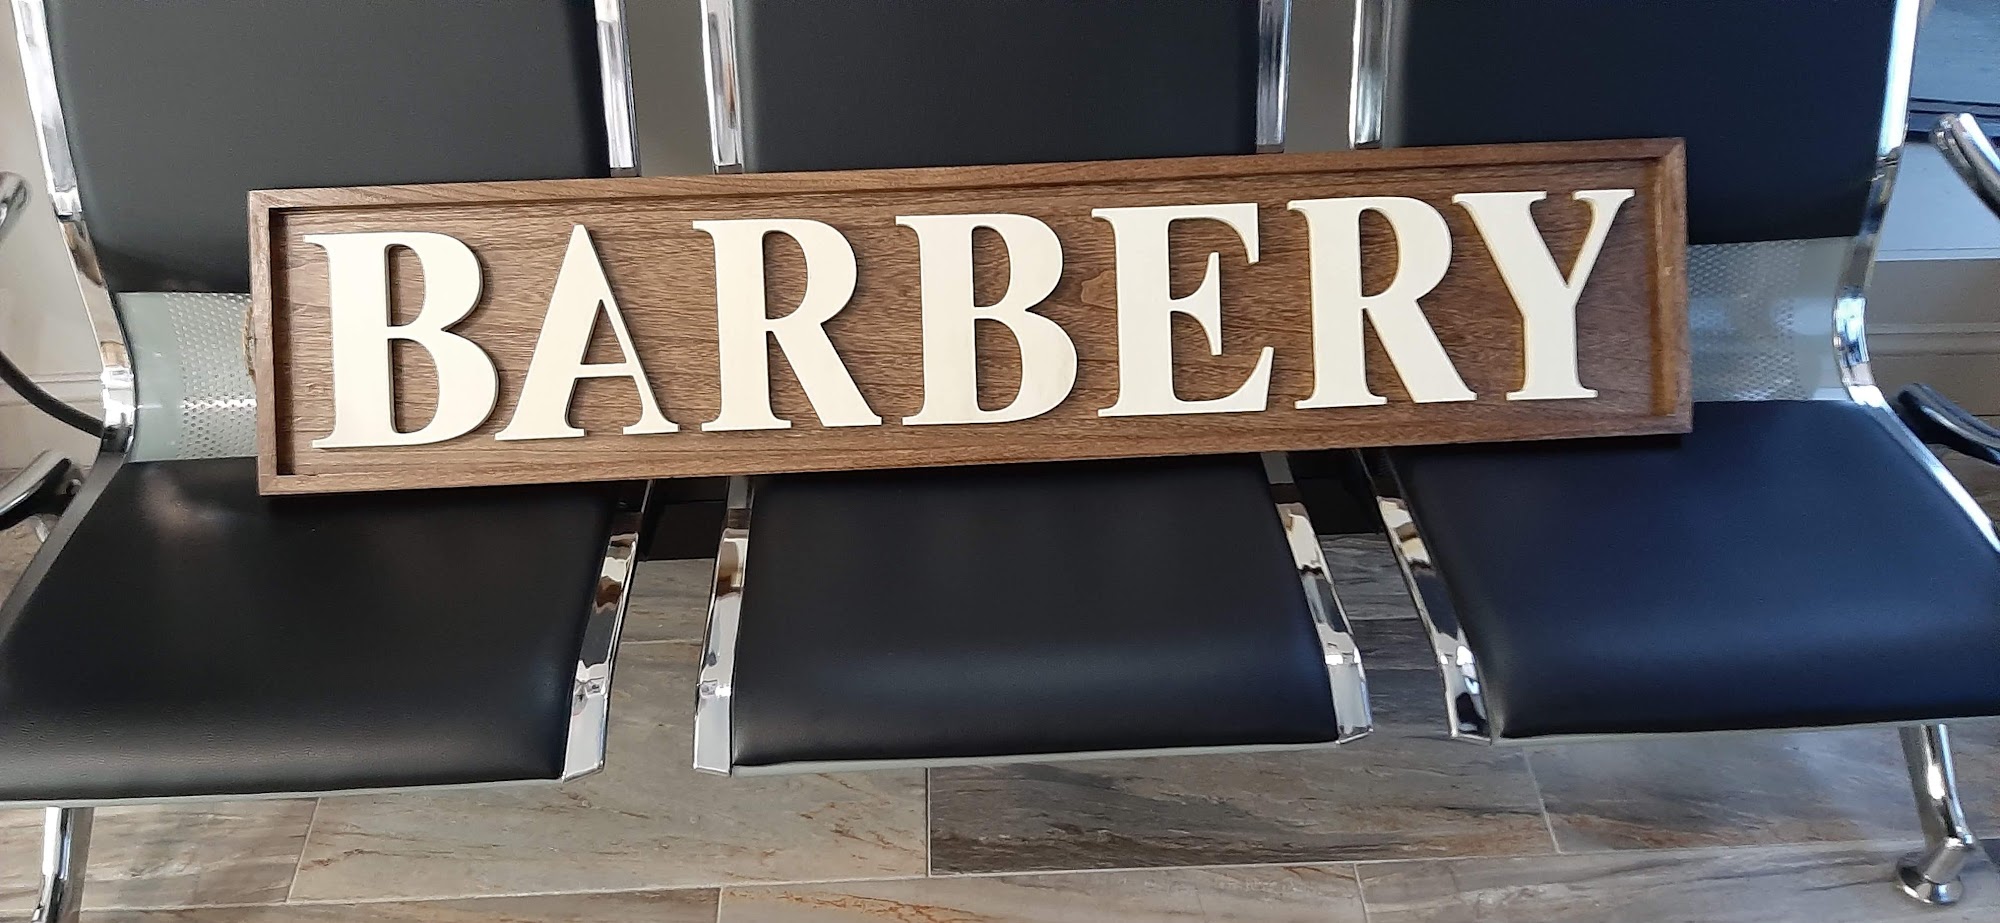 The Barbery Barber Shop (The One and Only) 100 Main St, Saranac Lake New York 12983